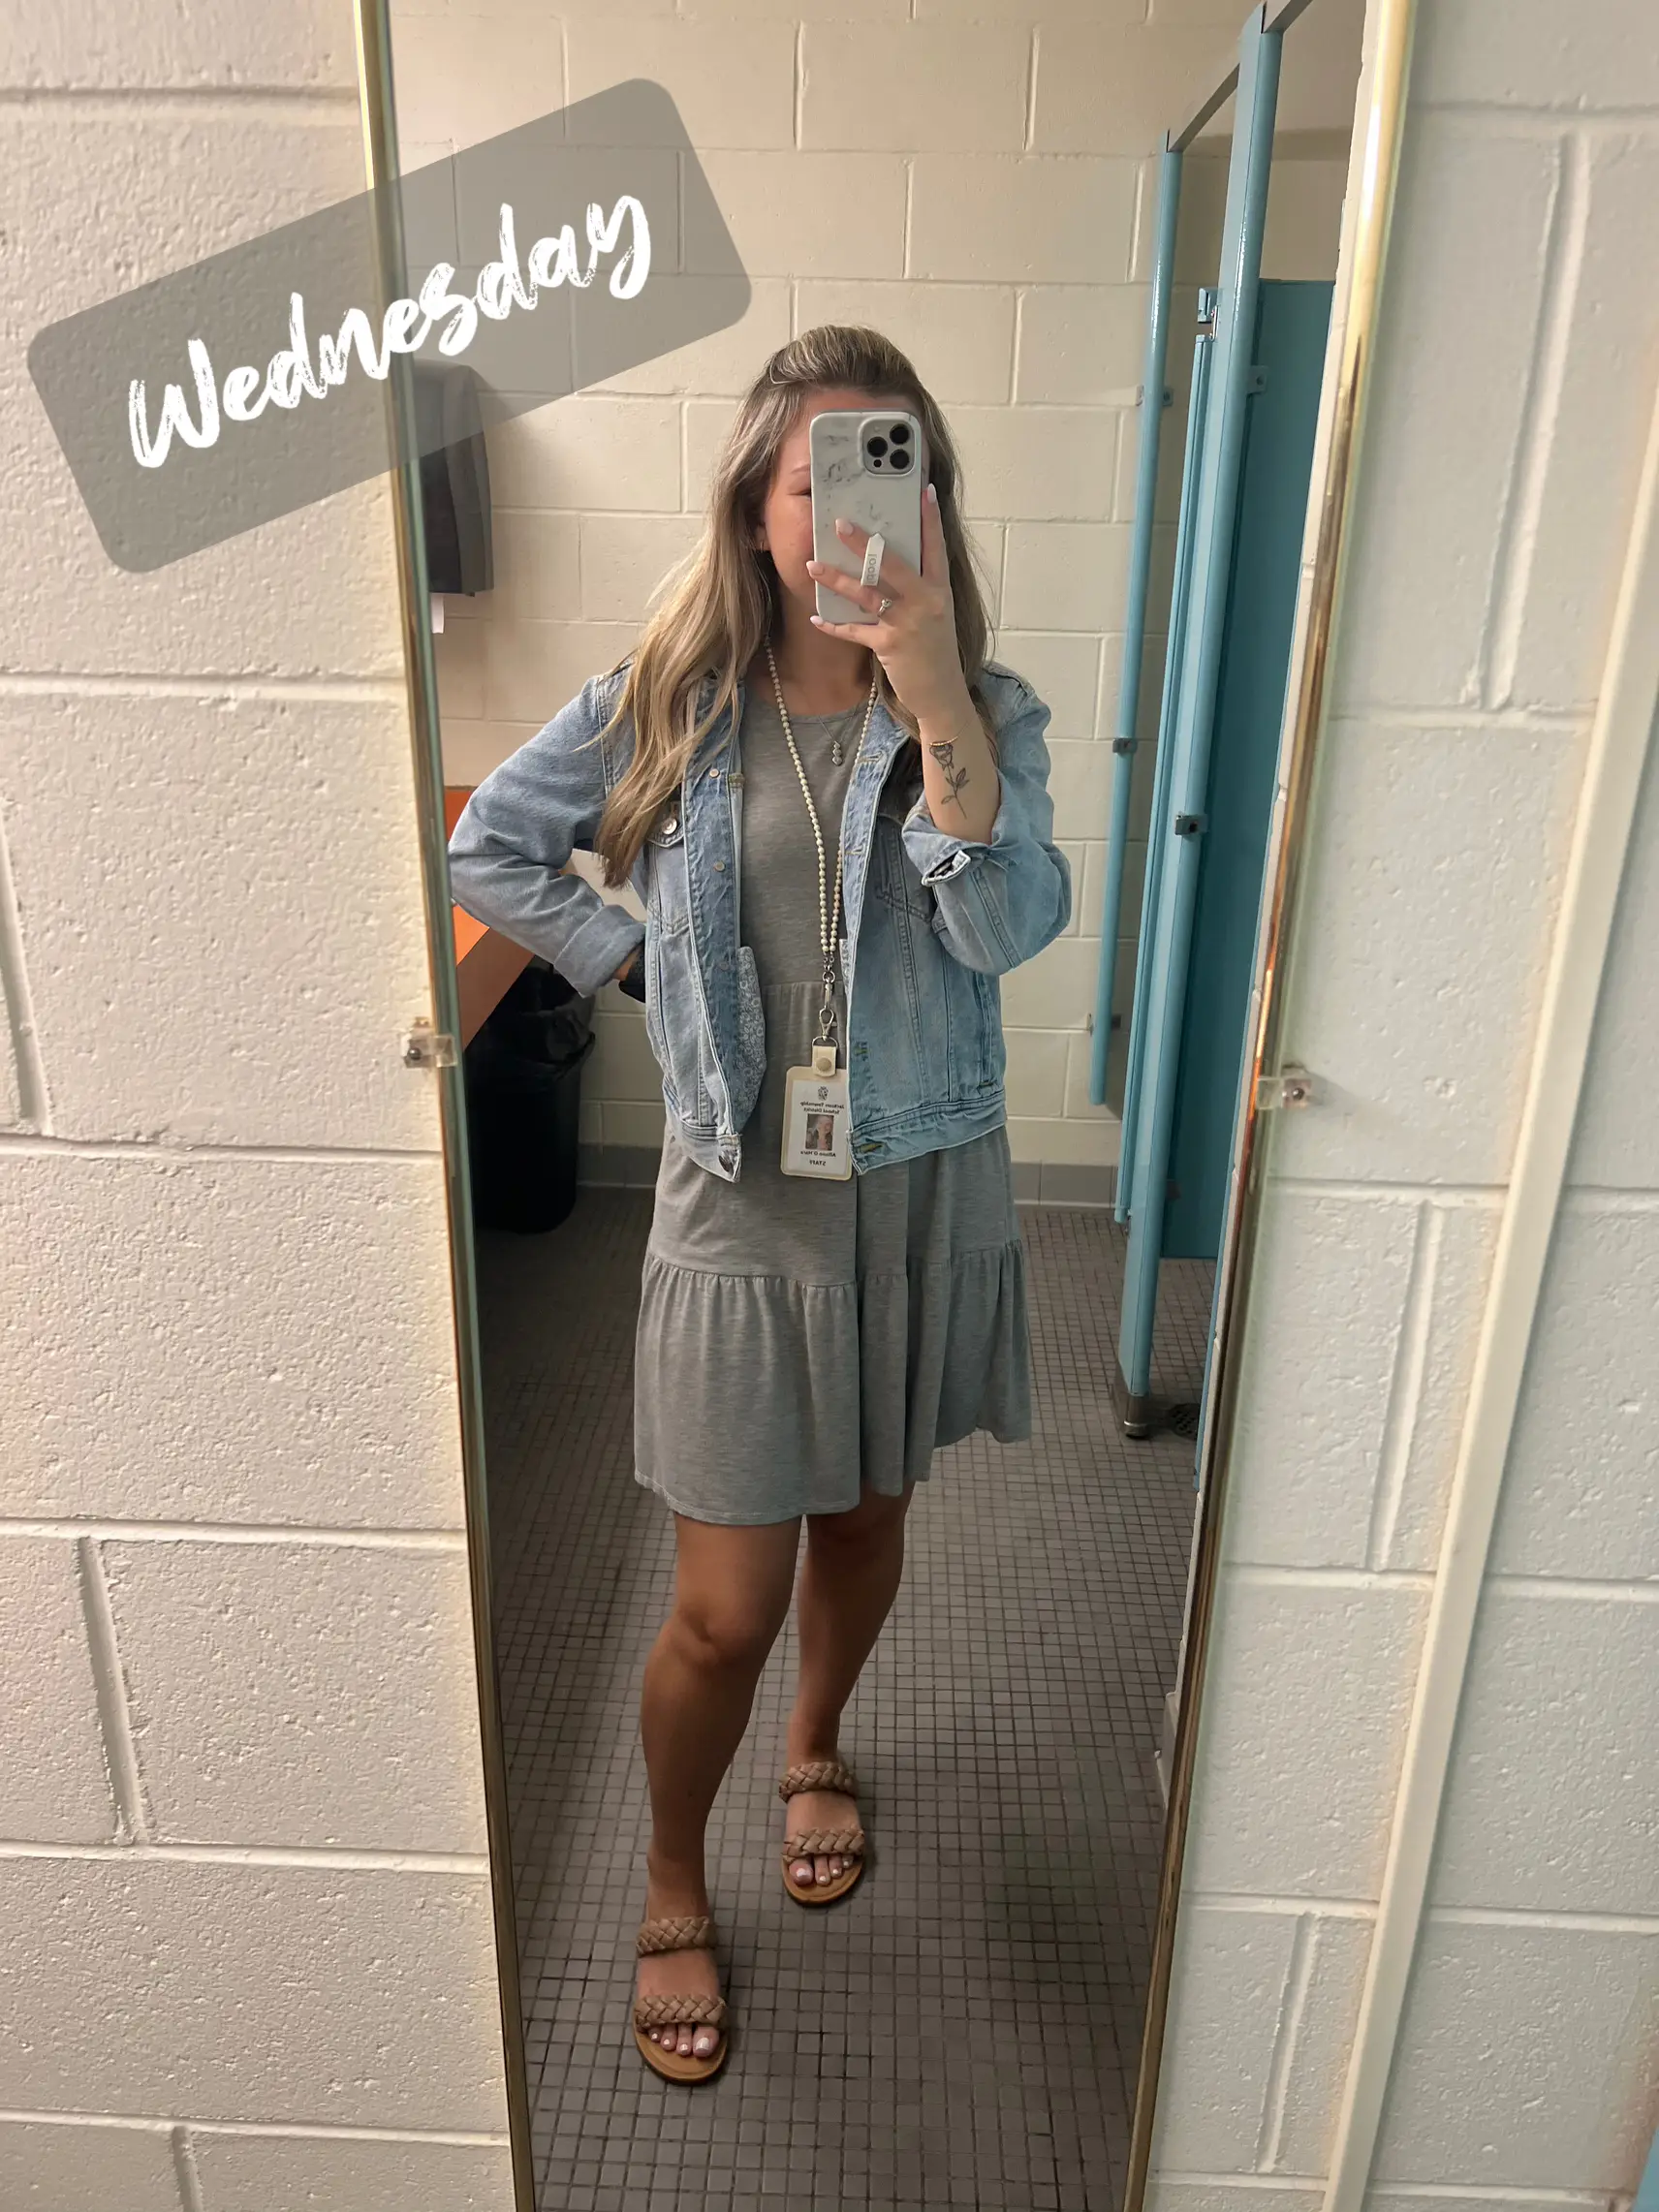 Calling All Teachers! Here's What to Wear When It's Hot Outside